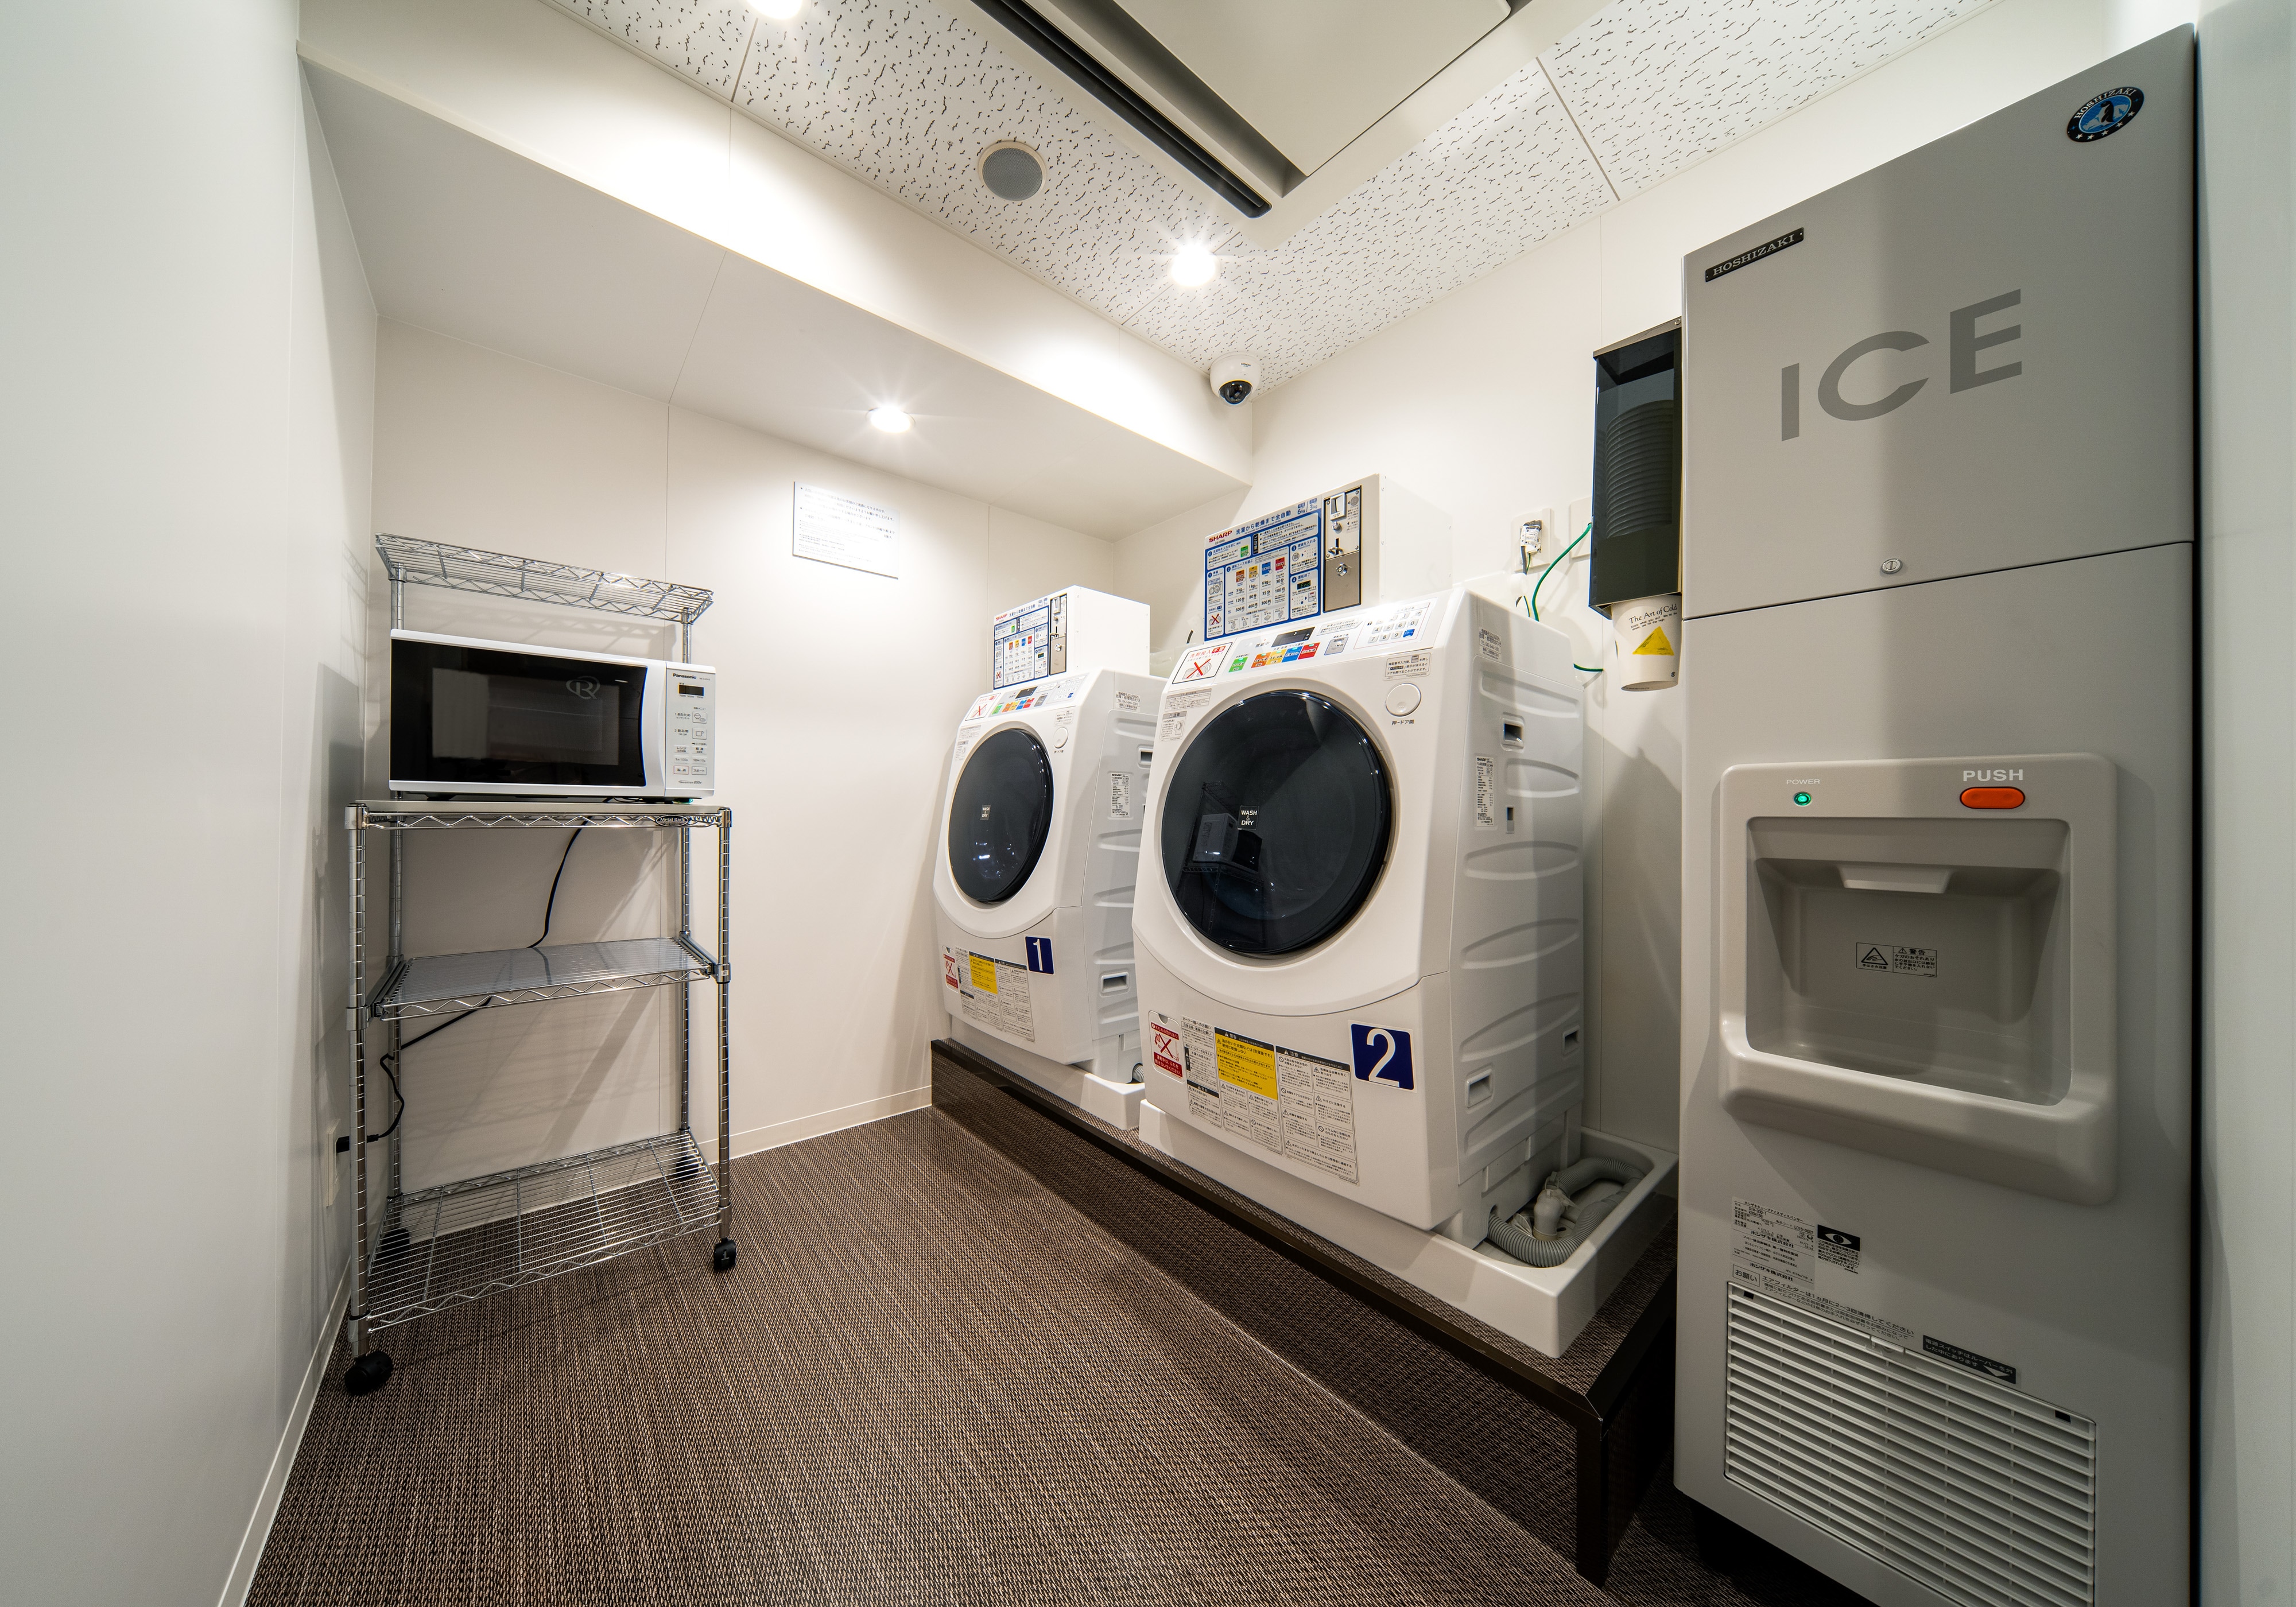 There is a coin laundry on the 2nd floor of the annex building ♪ The washing machine is fully automatic without the need for detergent ♪